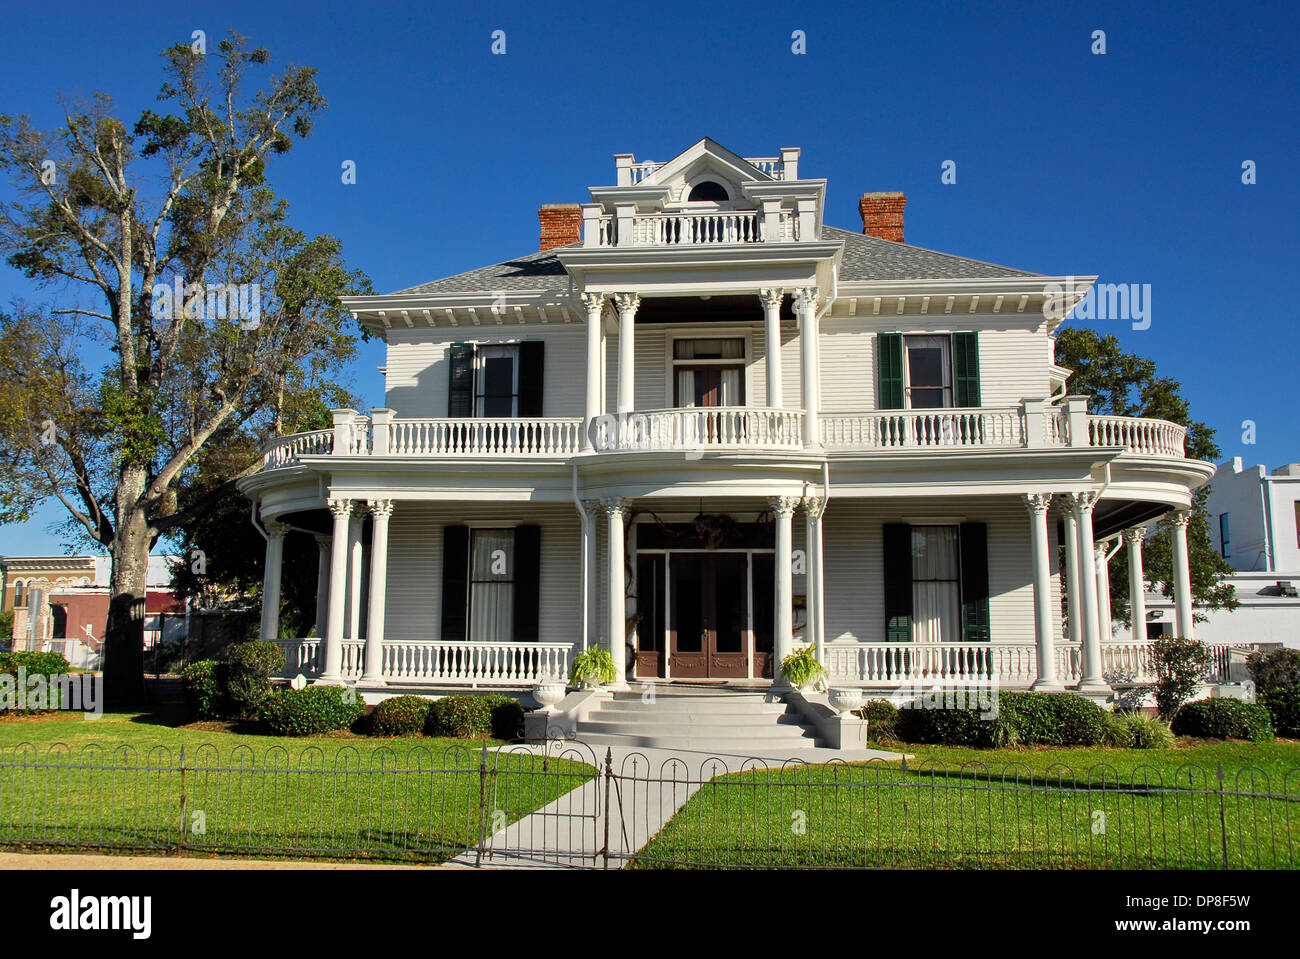 Architectural houses in Old Town, Biloxi, Mississippi Stock Photo